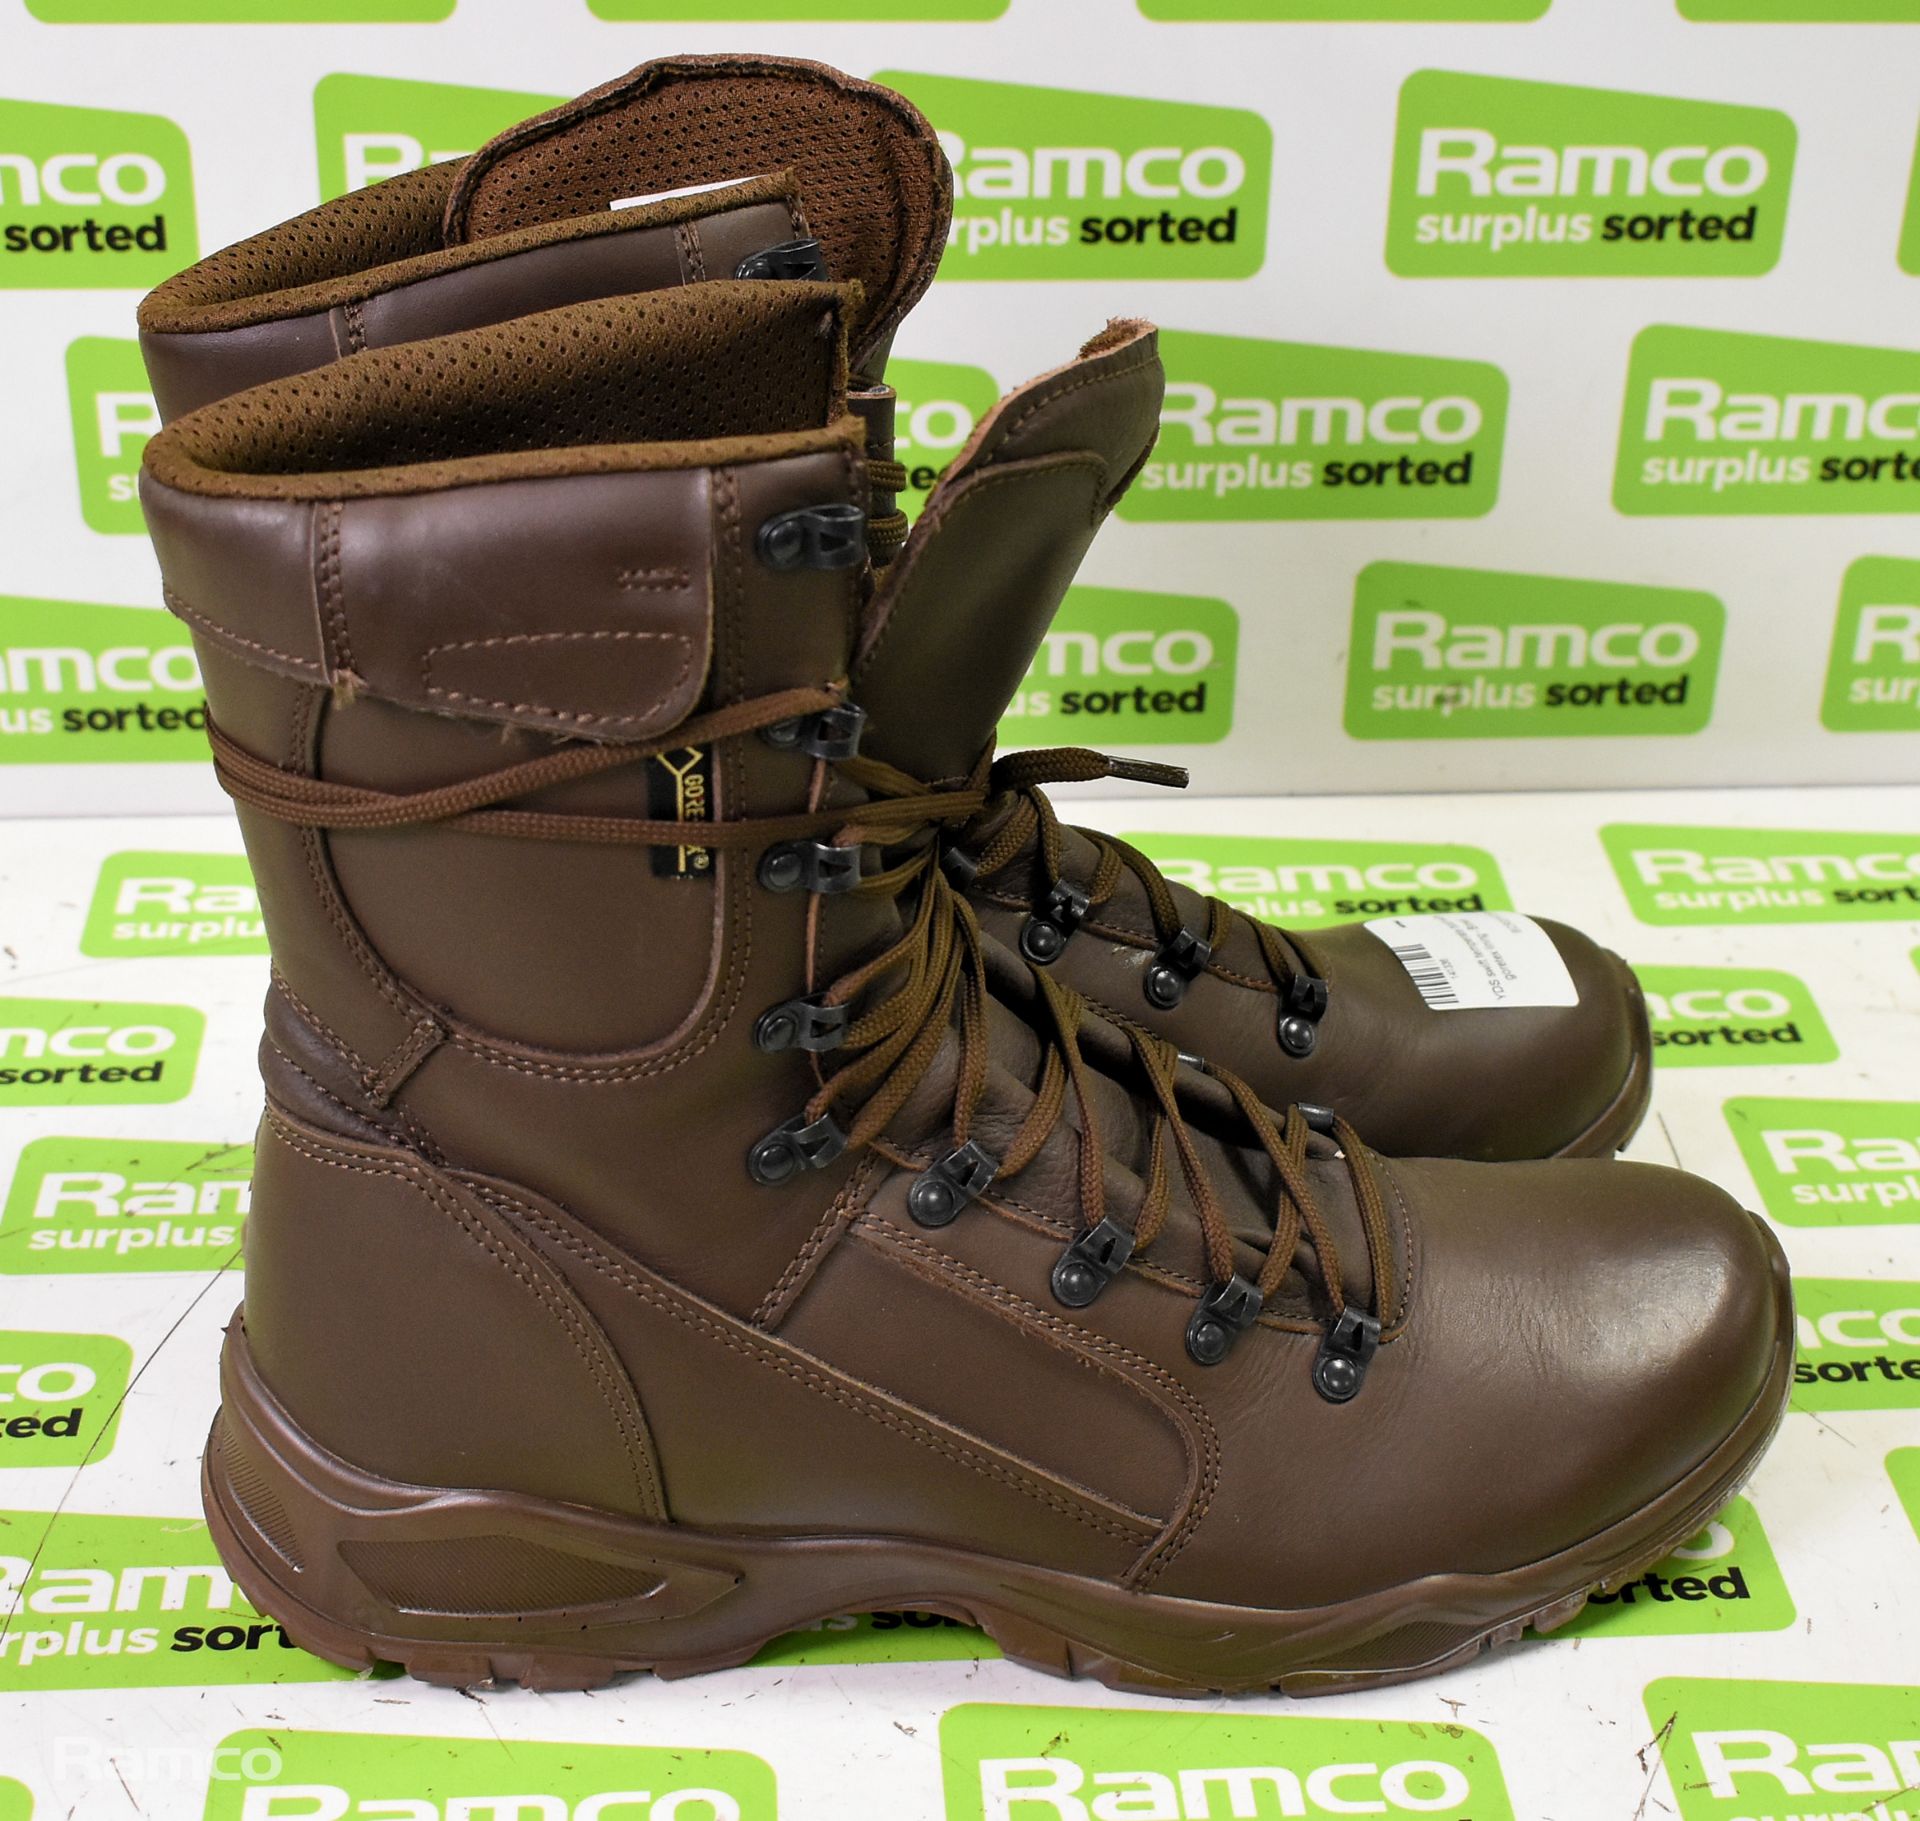 YDS swift temperate boots with Gore-tex lining - Brown - 11M - Image 2 of 5